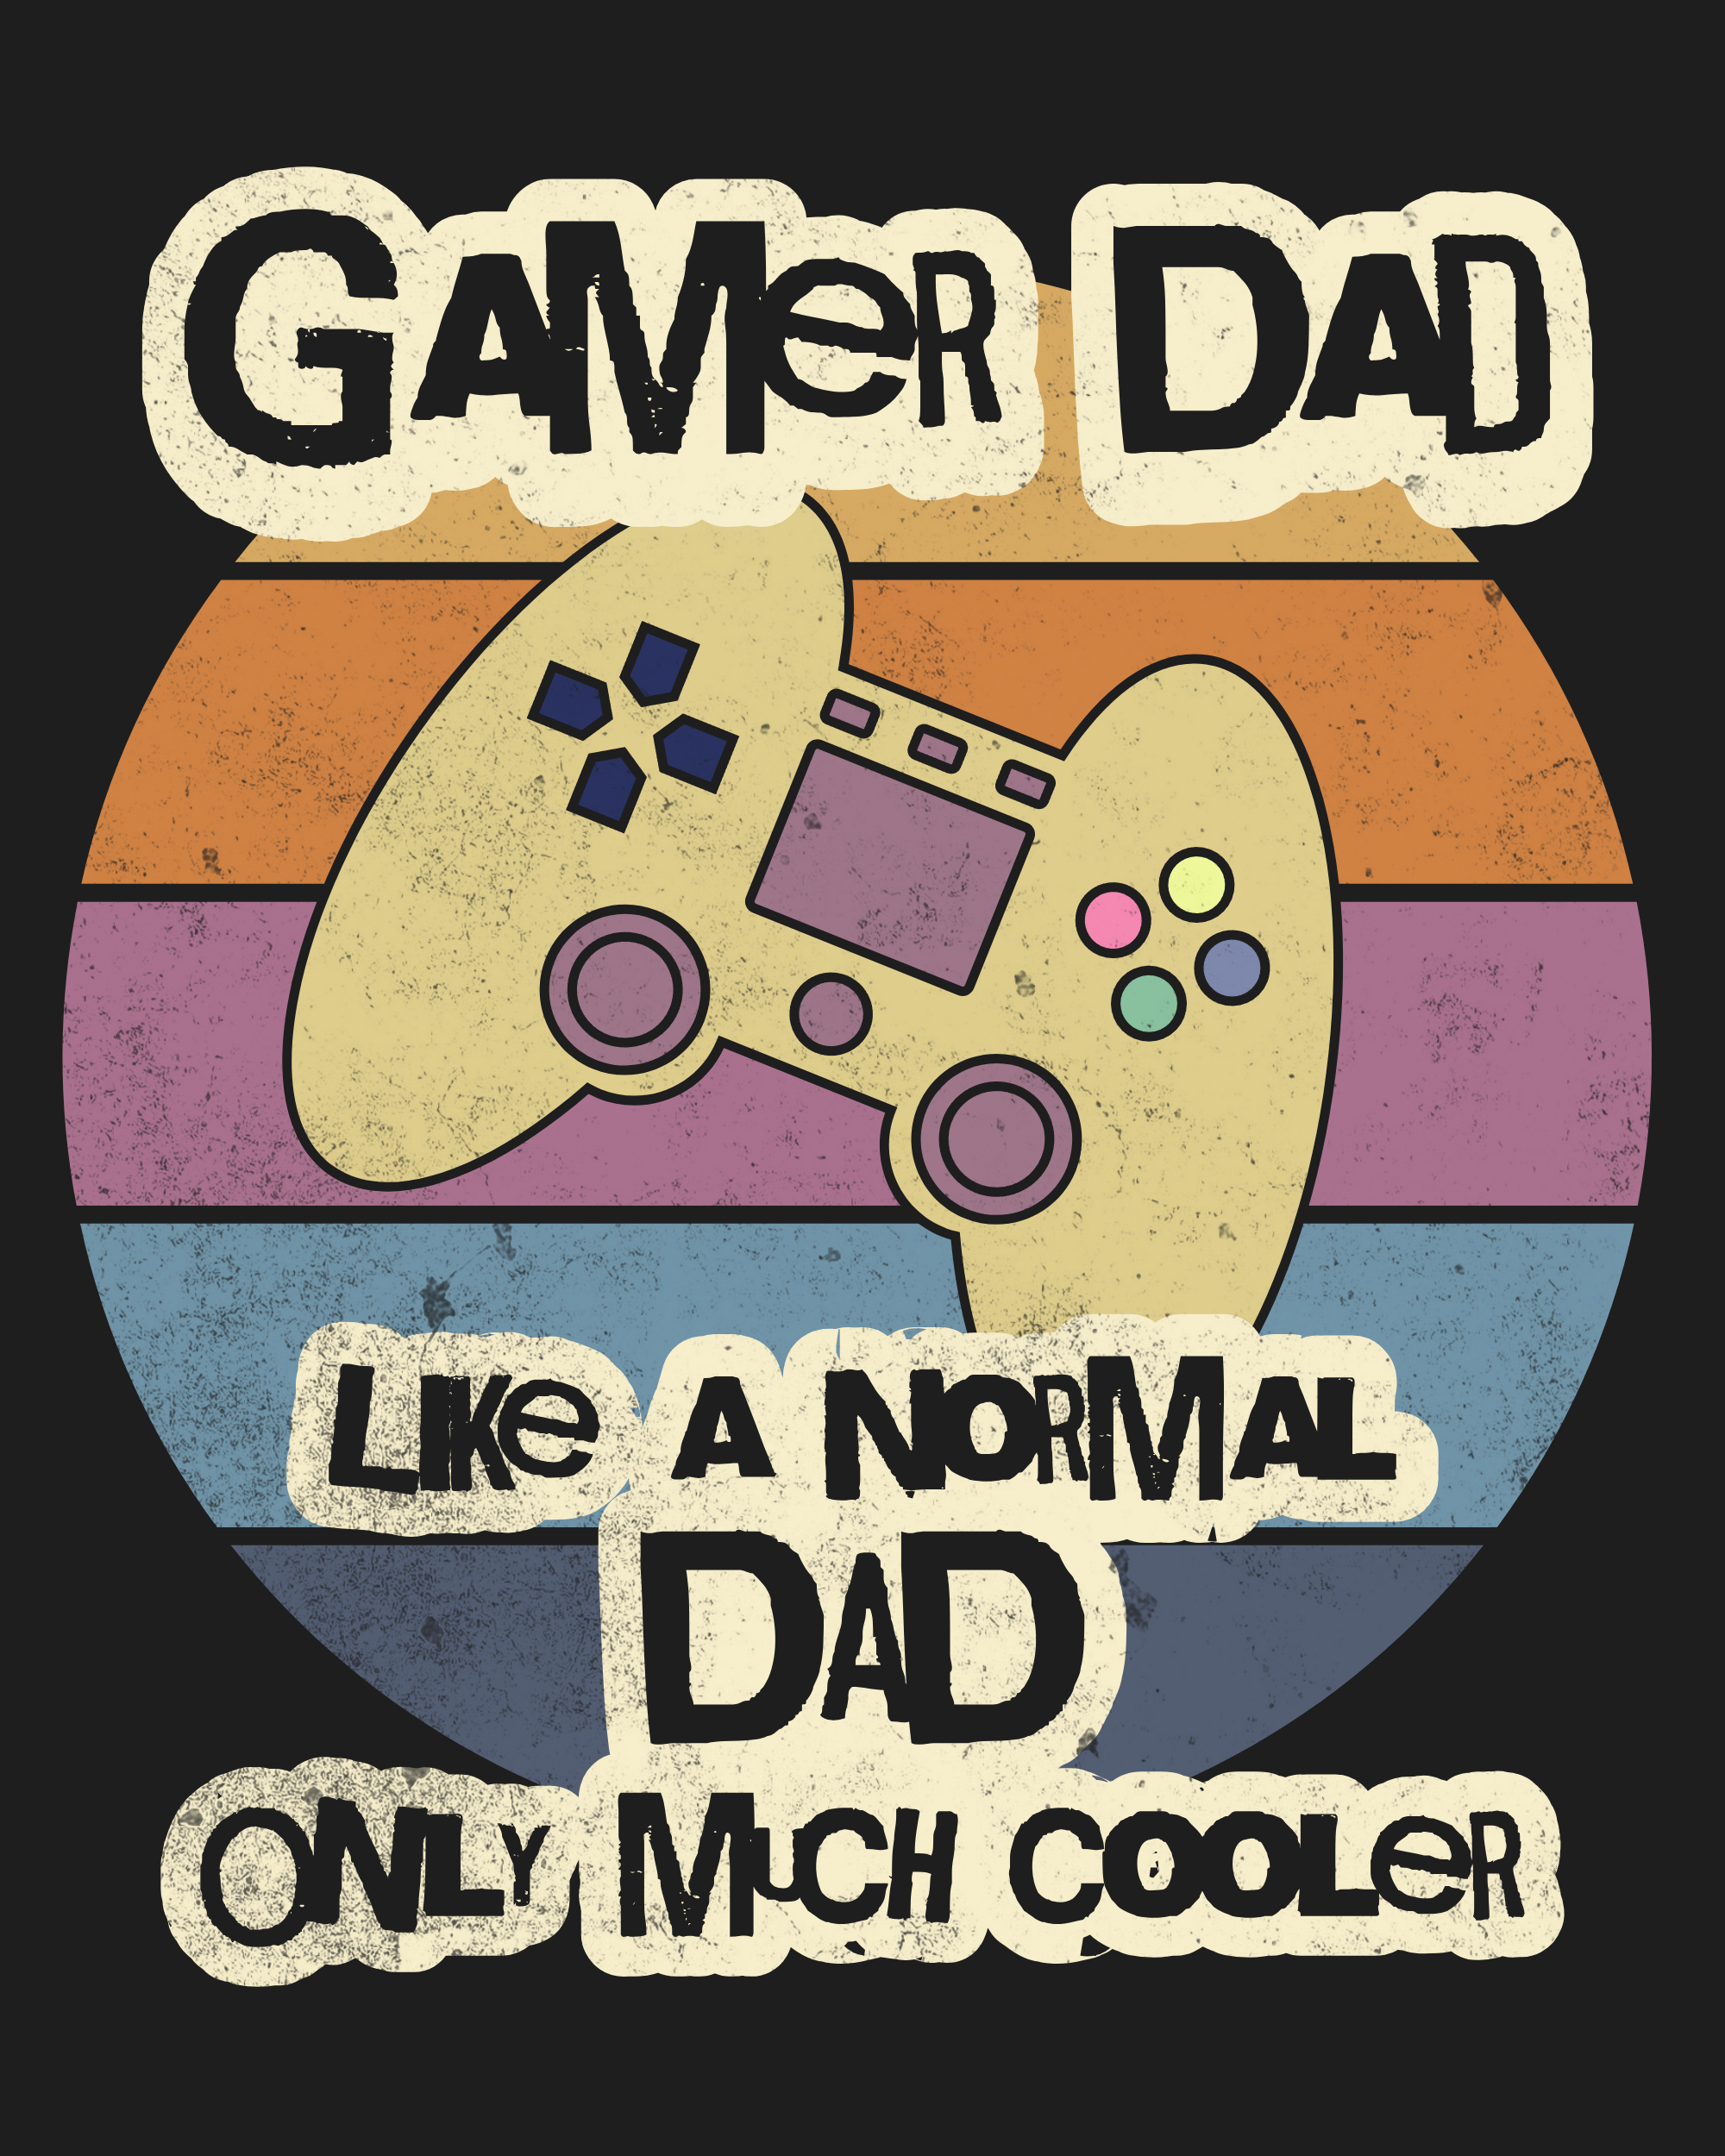 A t-shirt with the words " gamer dad like a normal dad only much cooler ".